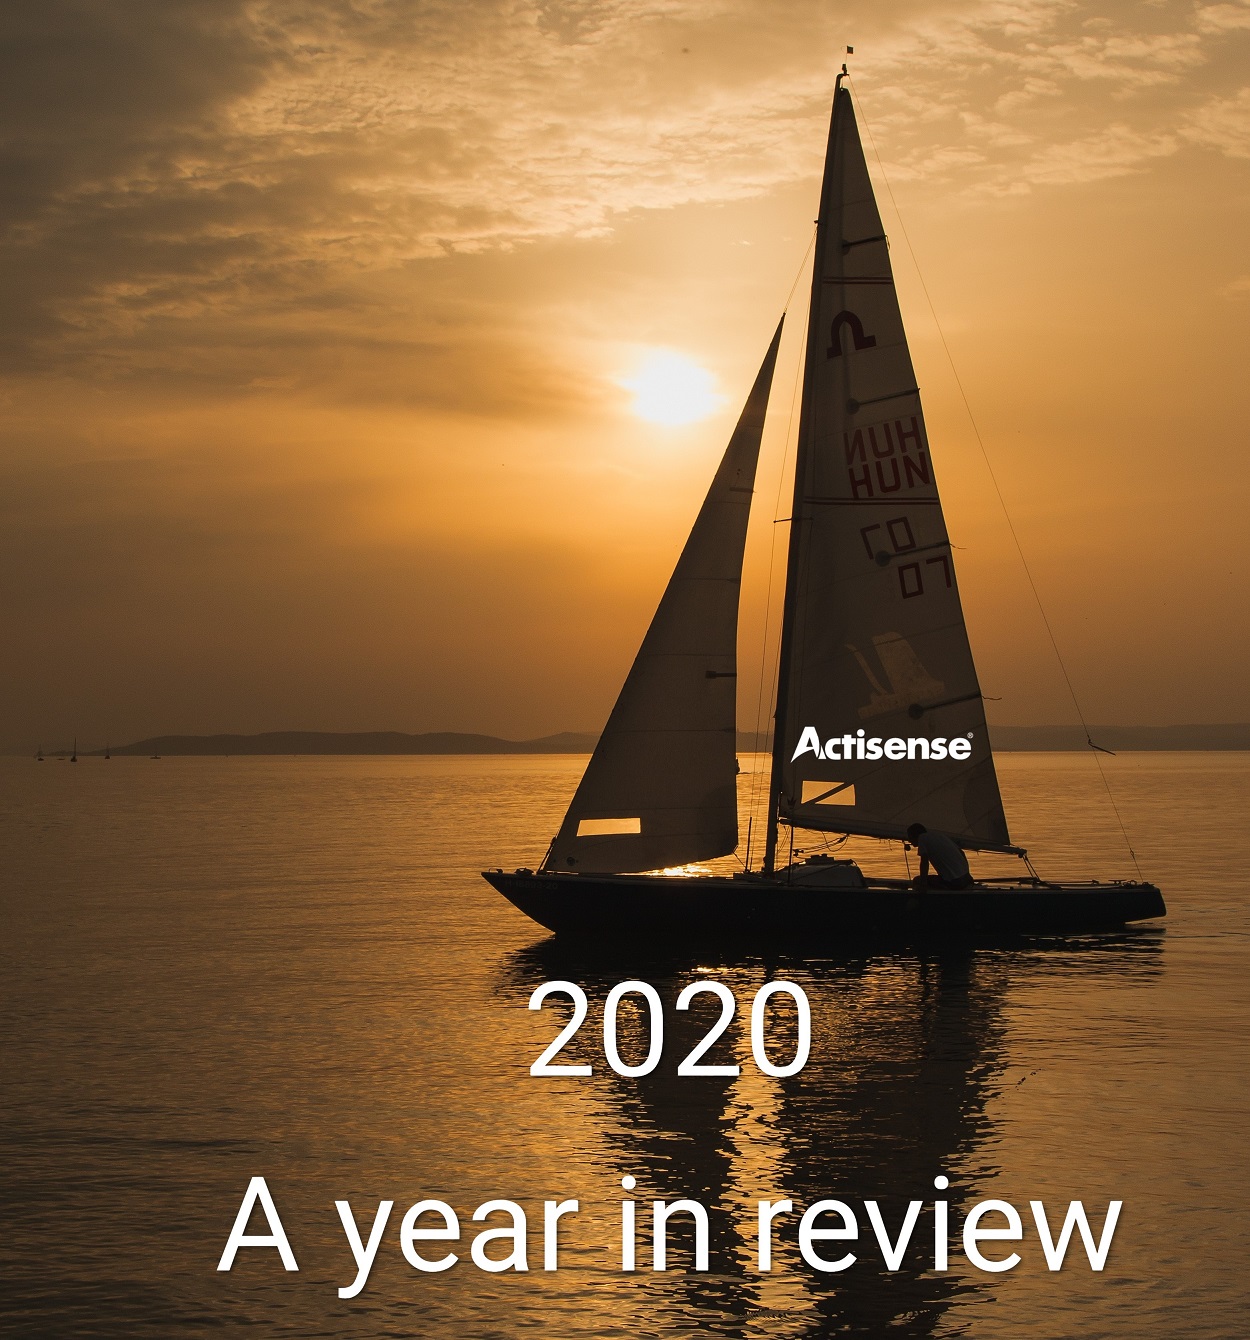 Year in review 2020